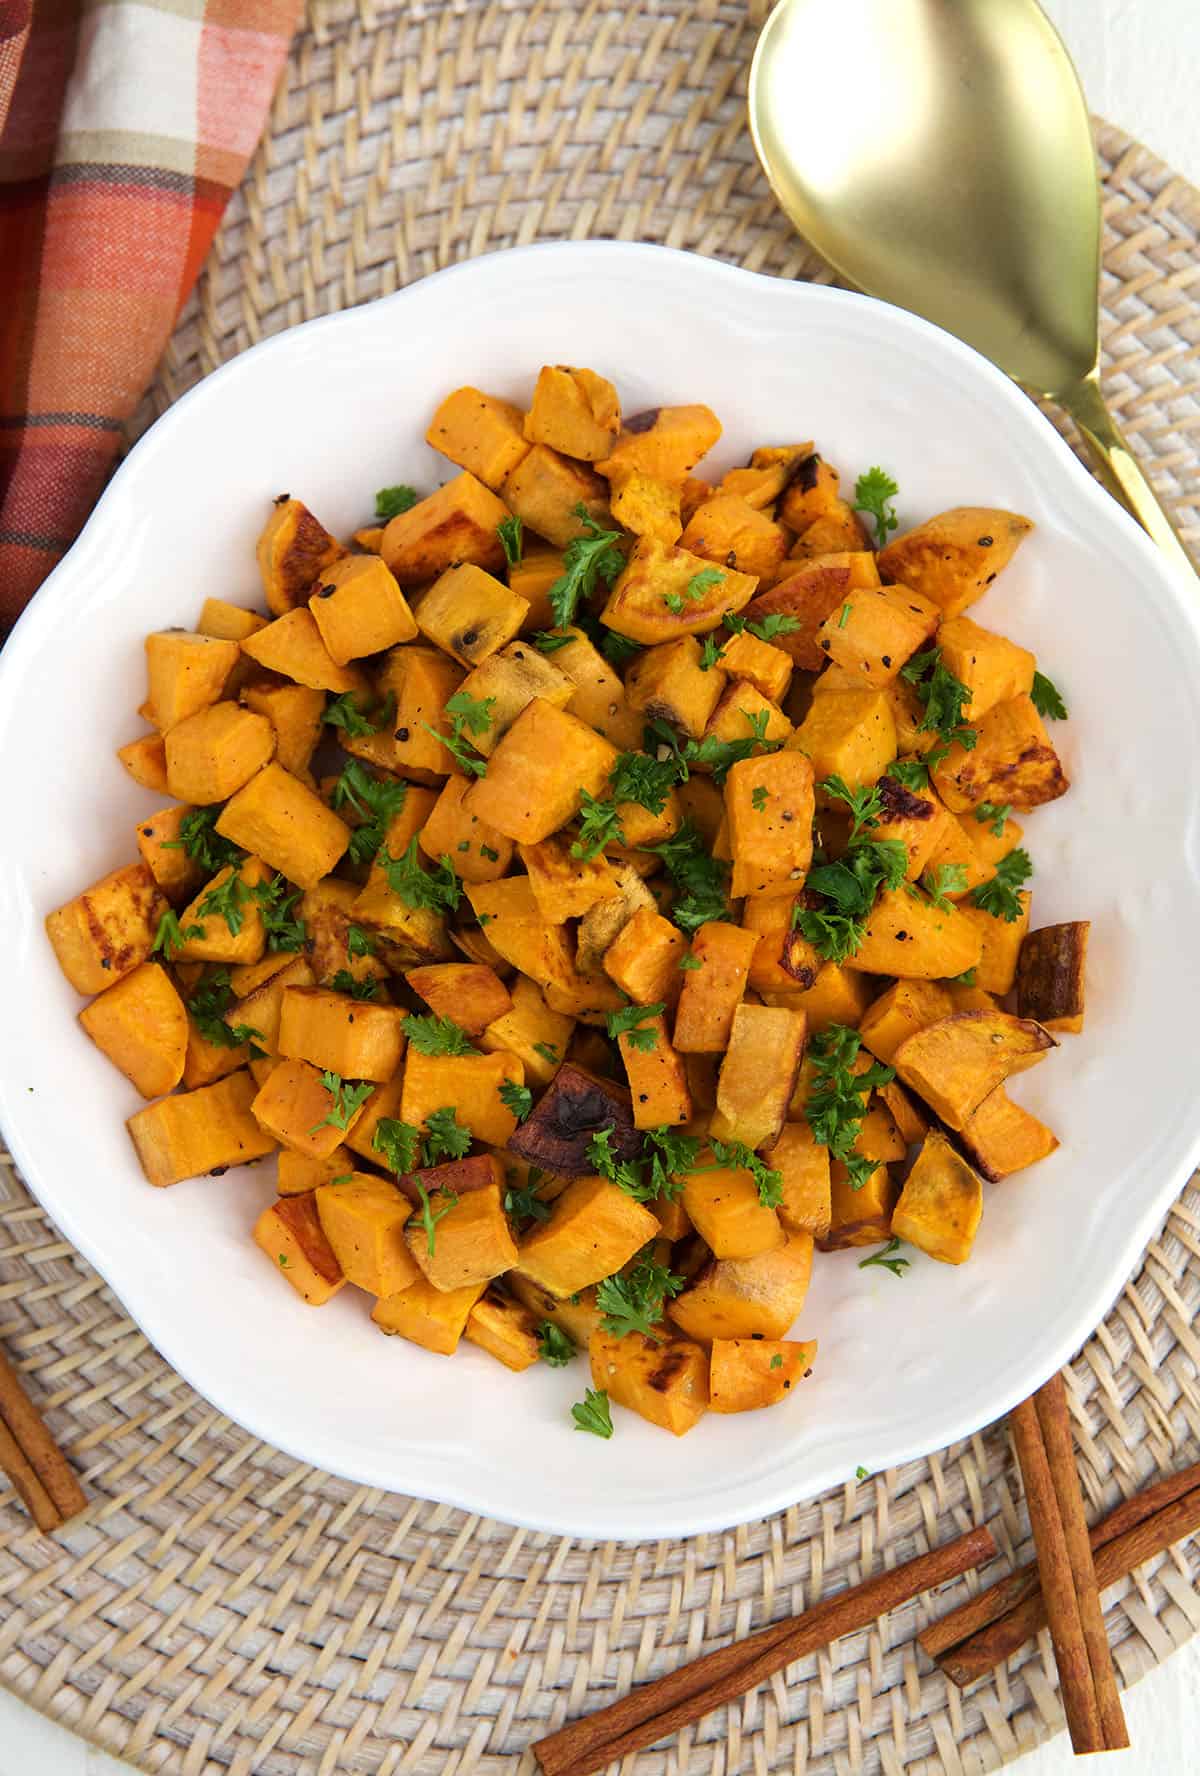 Roasted sweet potatoes are placed on a round white plate.